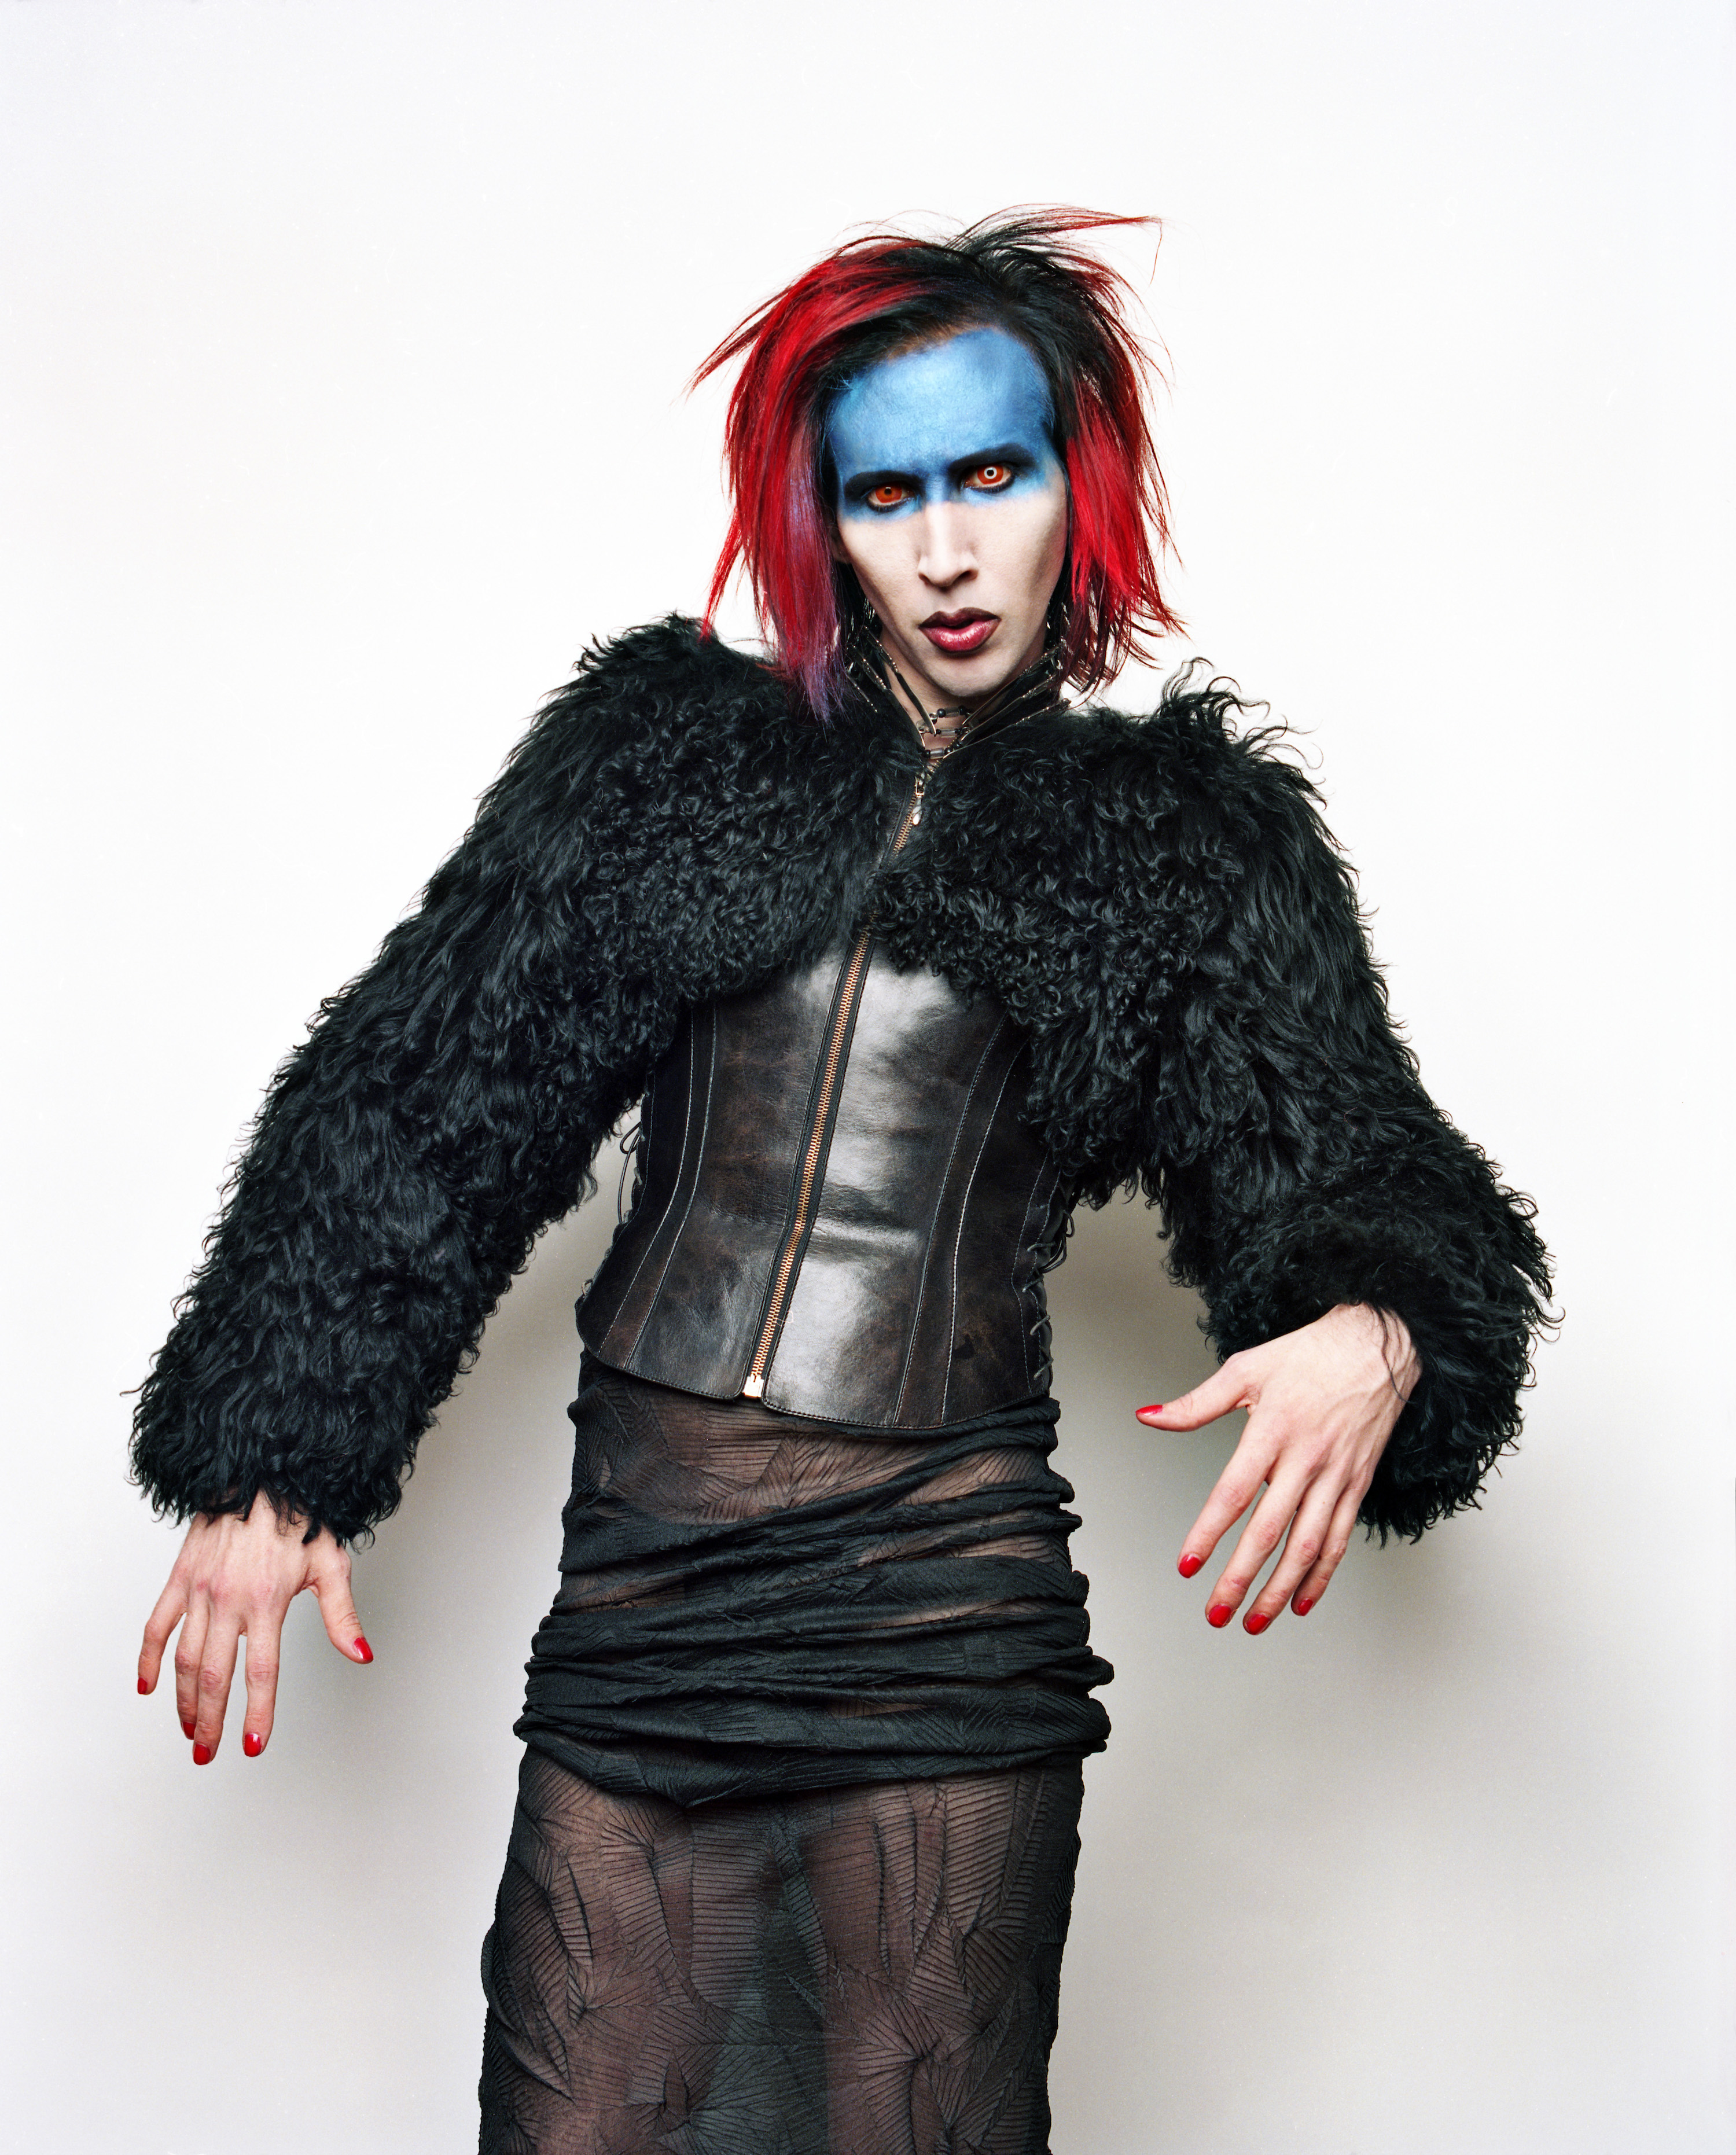 7 Of Marilyn Manson S Most Iconic Outfits I D